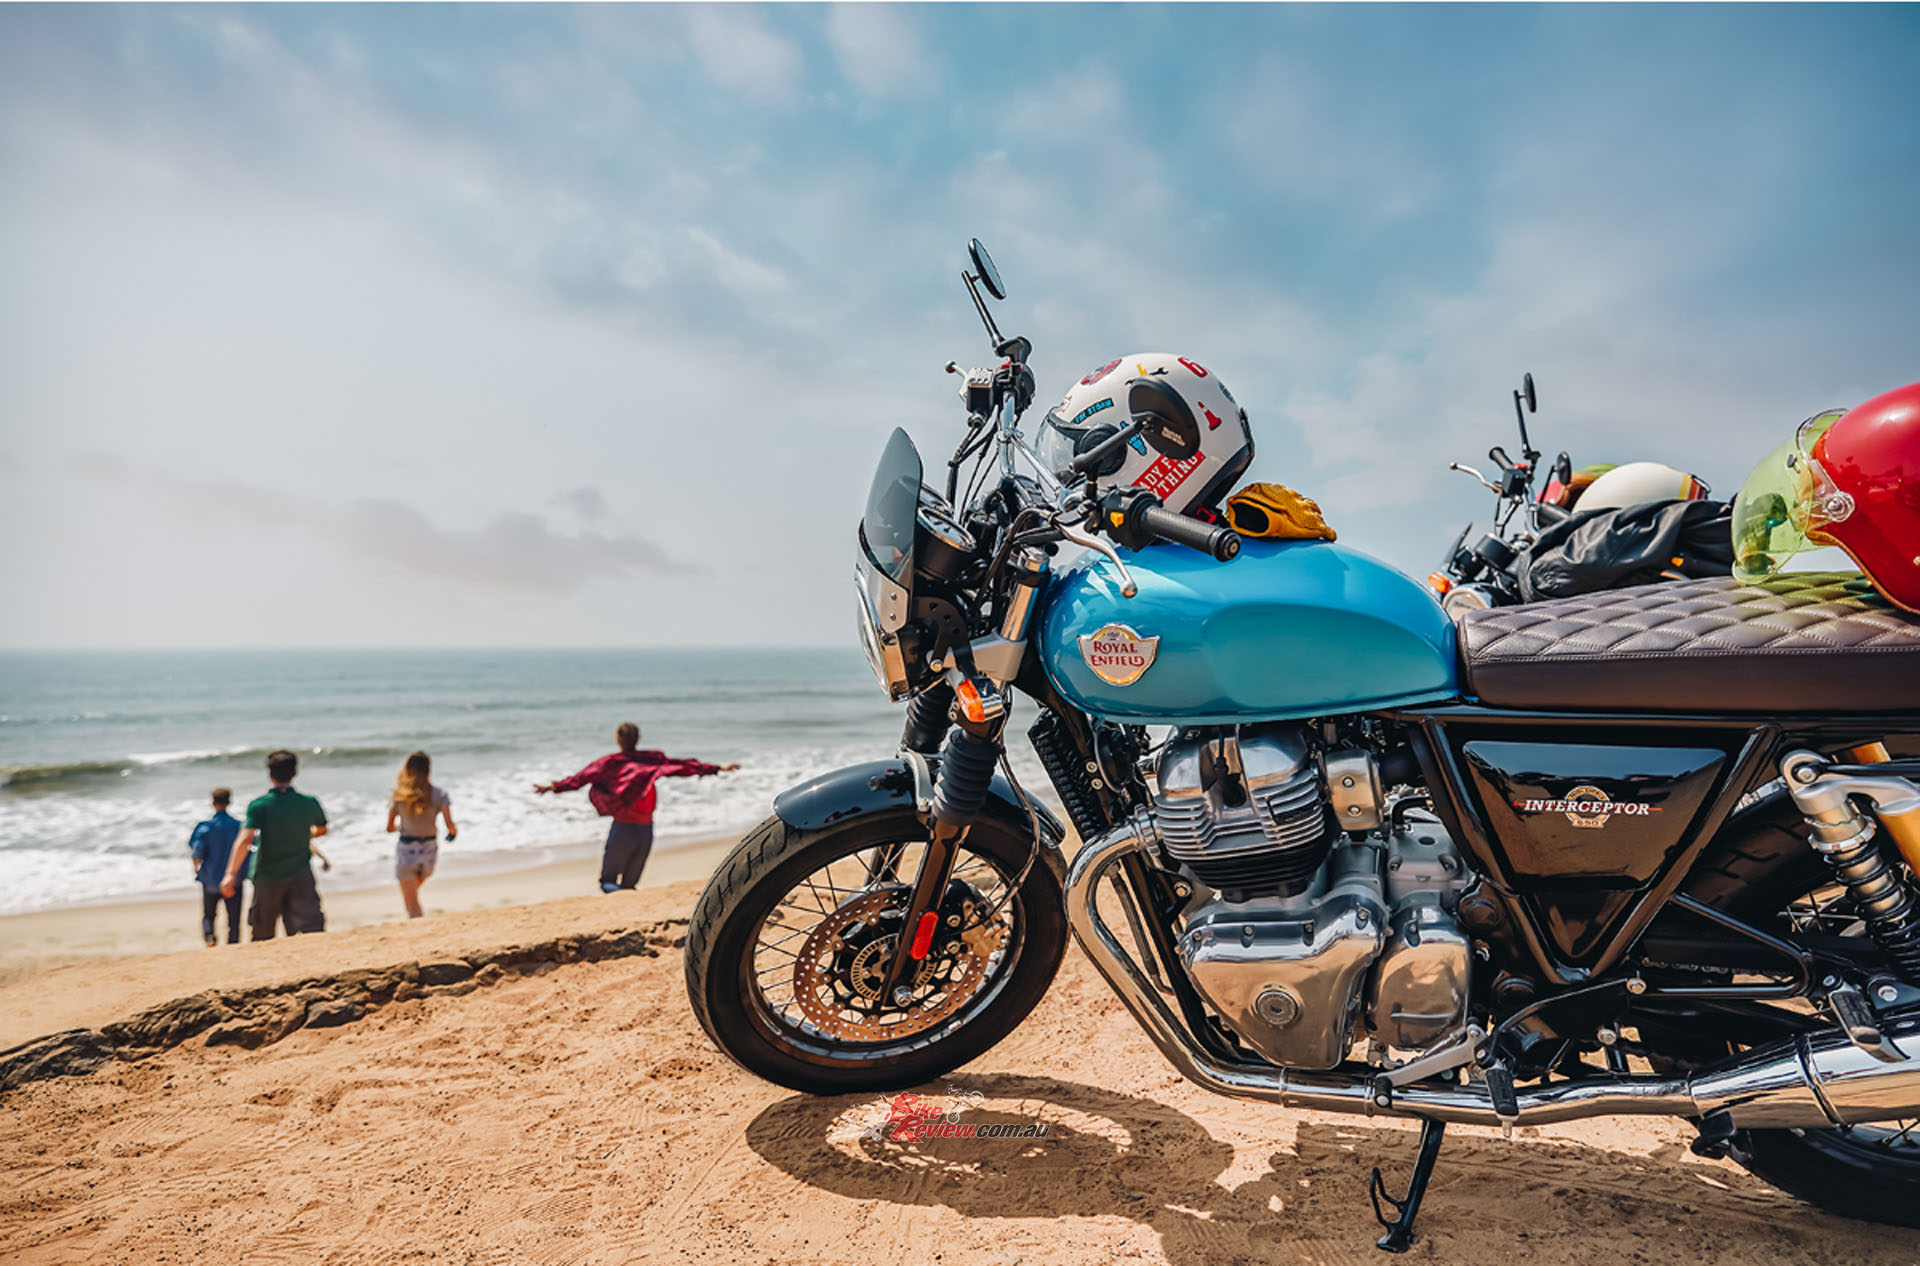 The bundles are pre-selected consisting of the most popular genuine Royal Enfield accessories across the 650 Twin range.